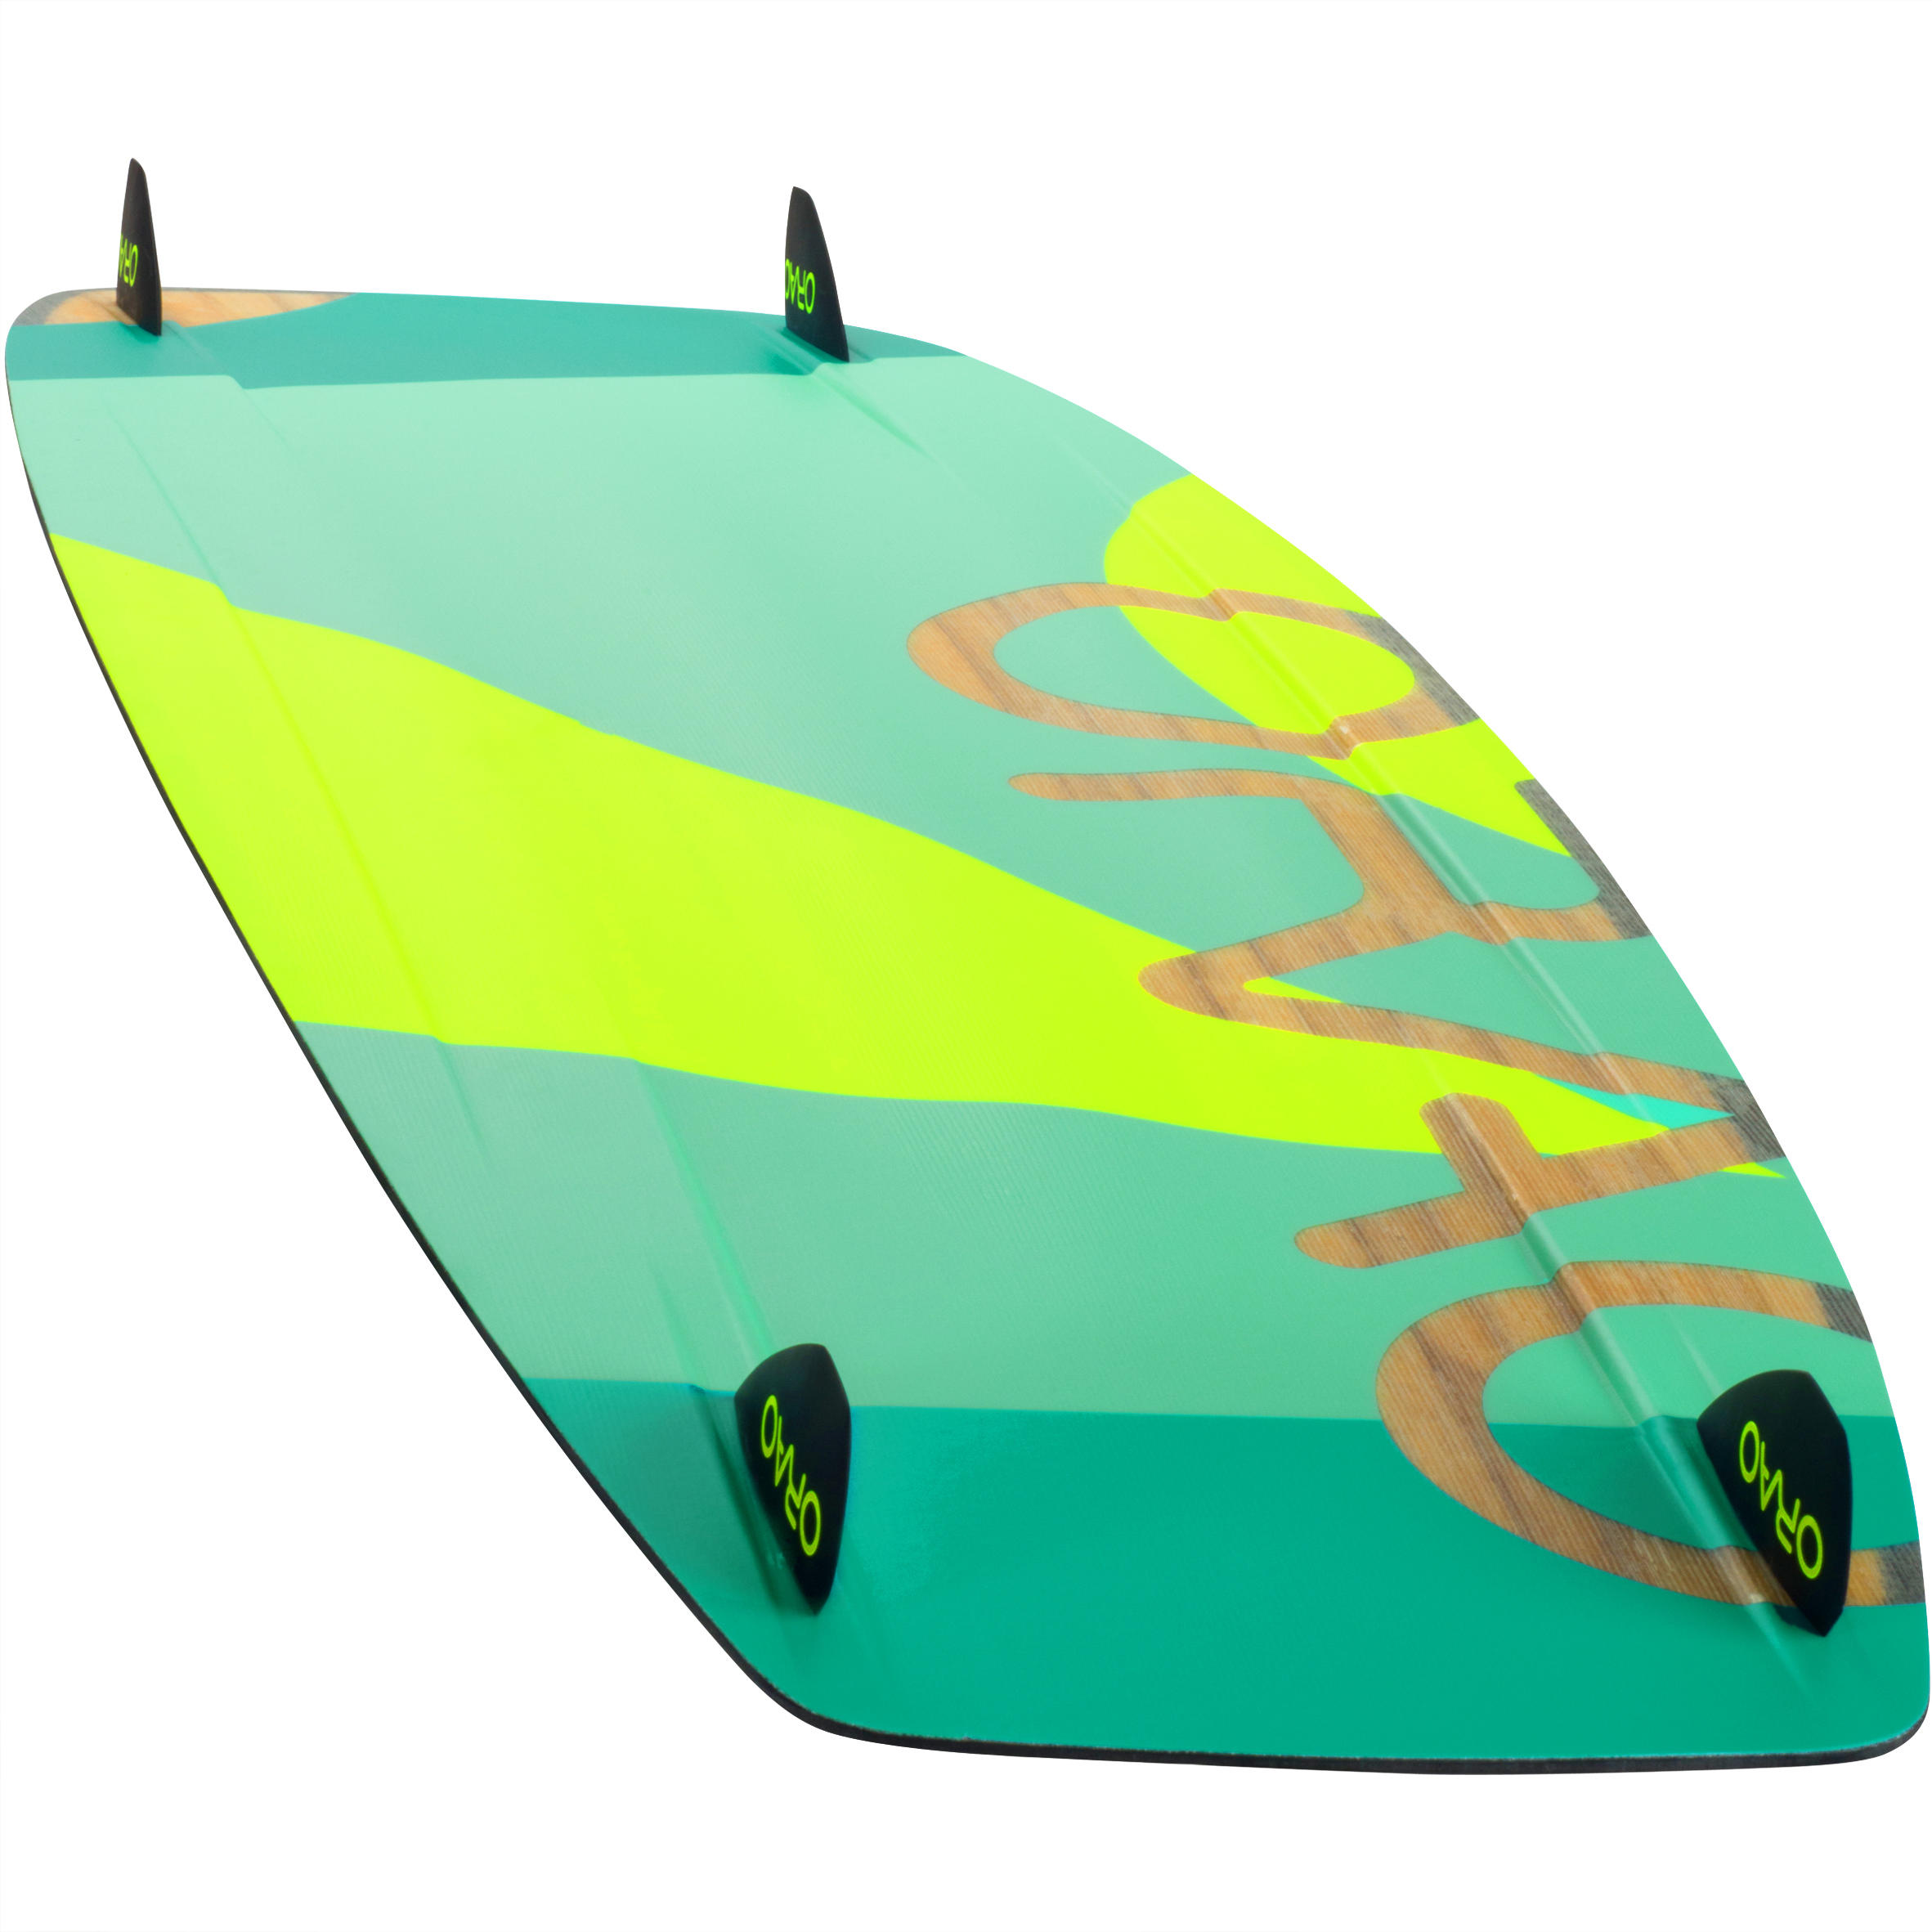 Twintip carbon kitesurf board 136 x 40.5 cm (pads and straps included) - TT500 5/30